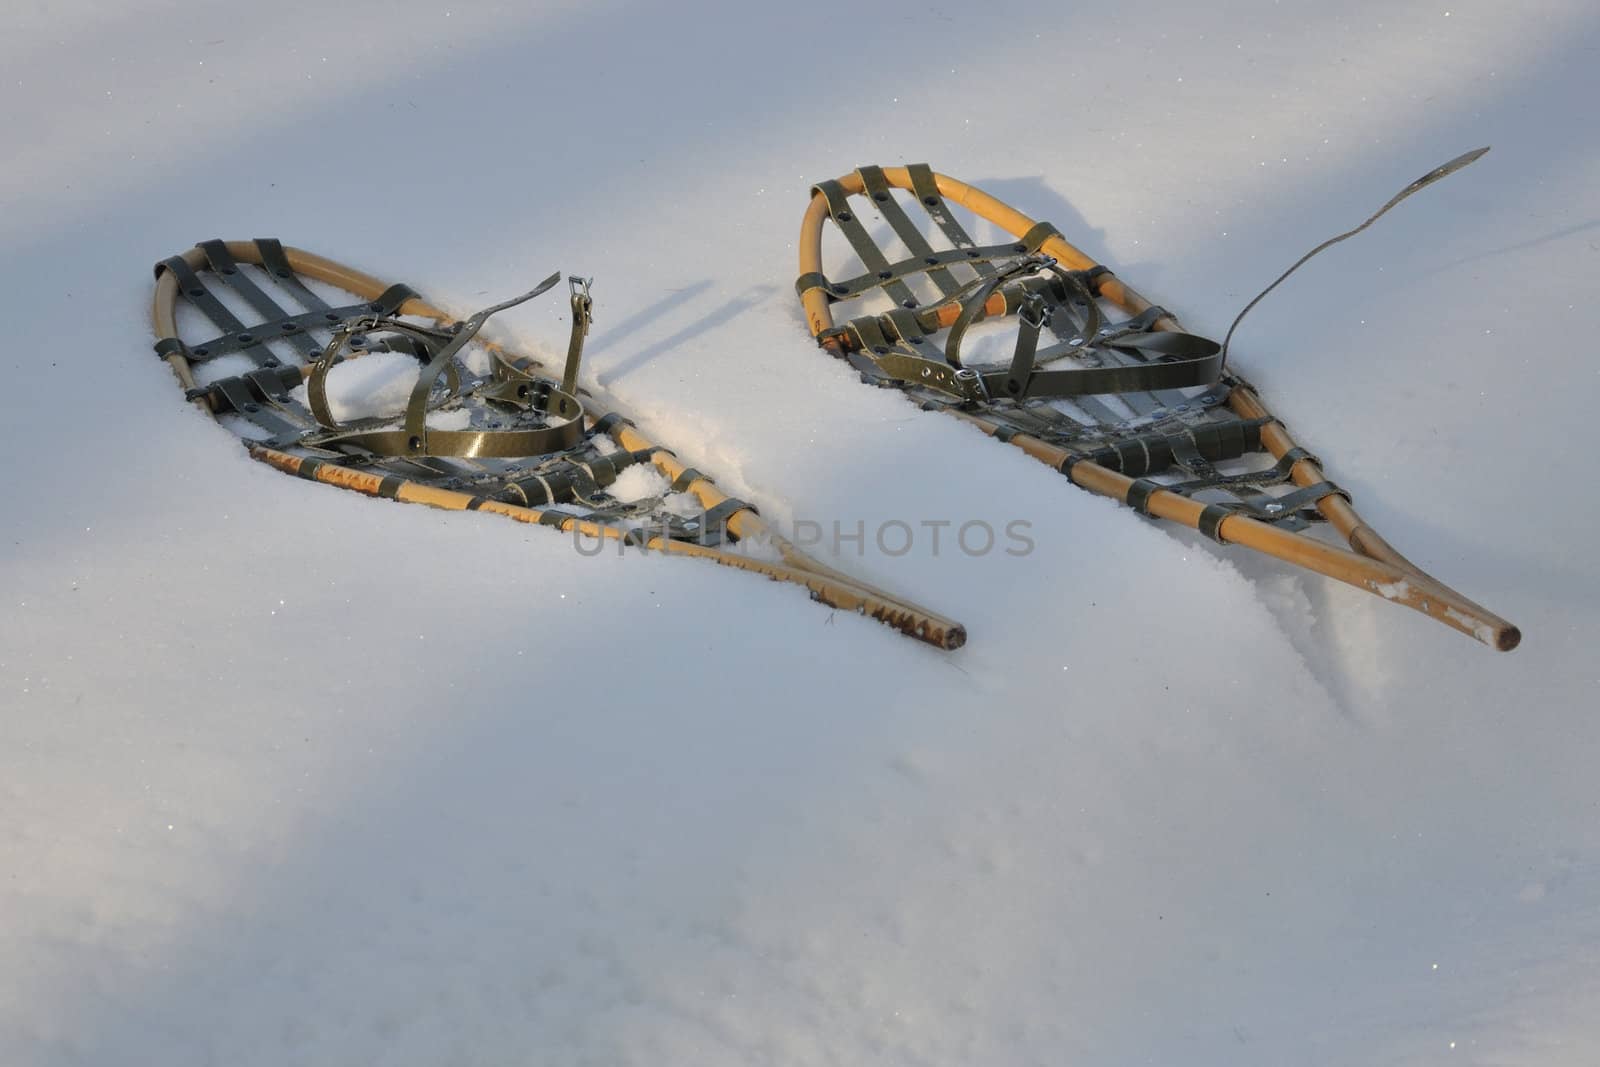 Photo of snowshoes - you can walk on snow with them.